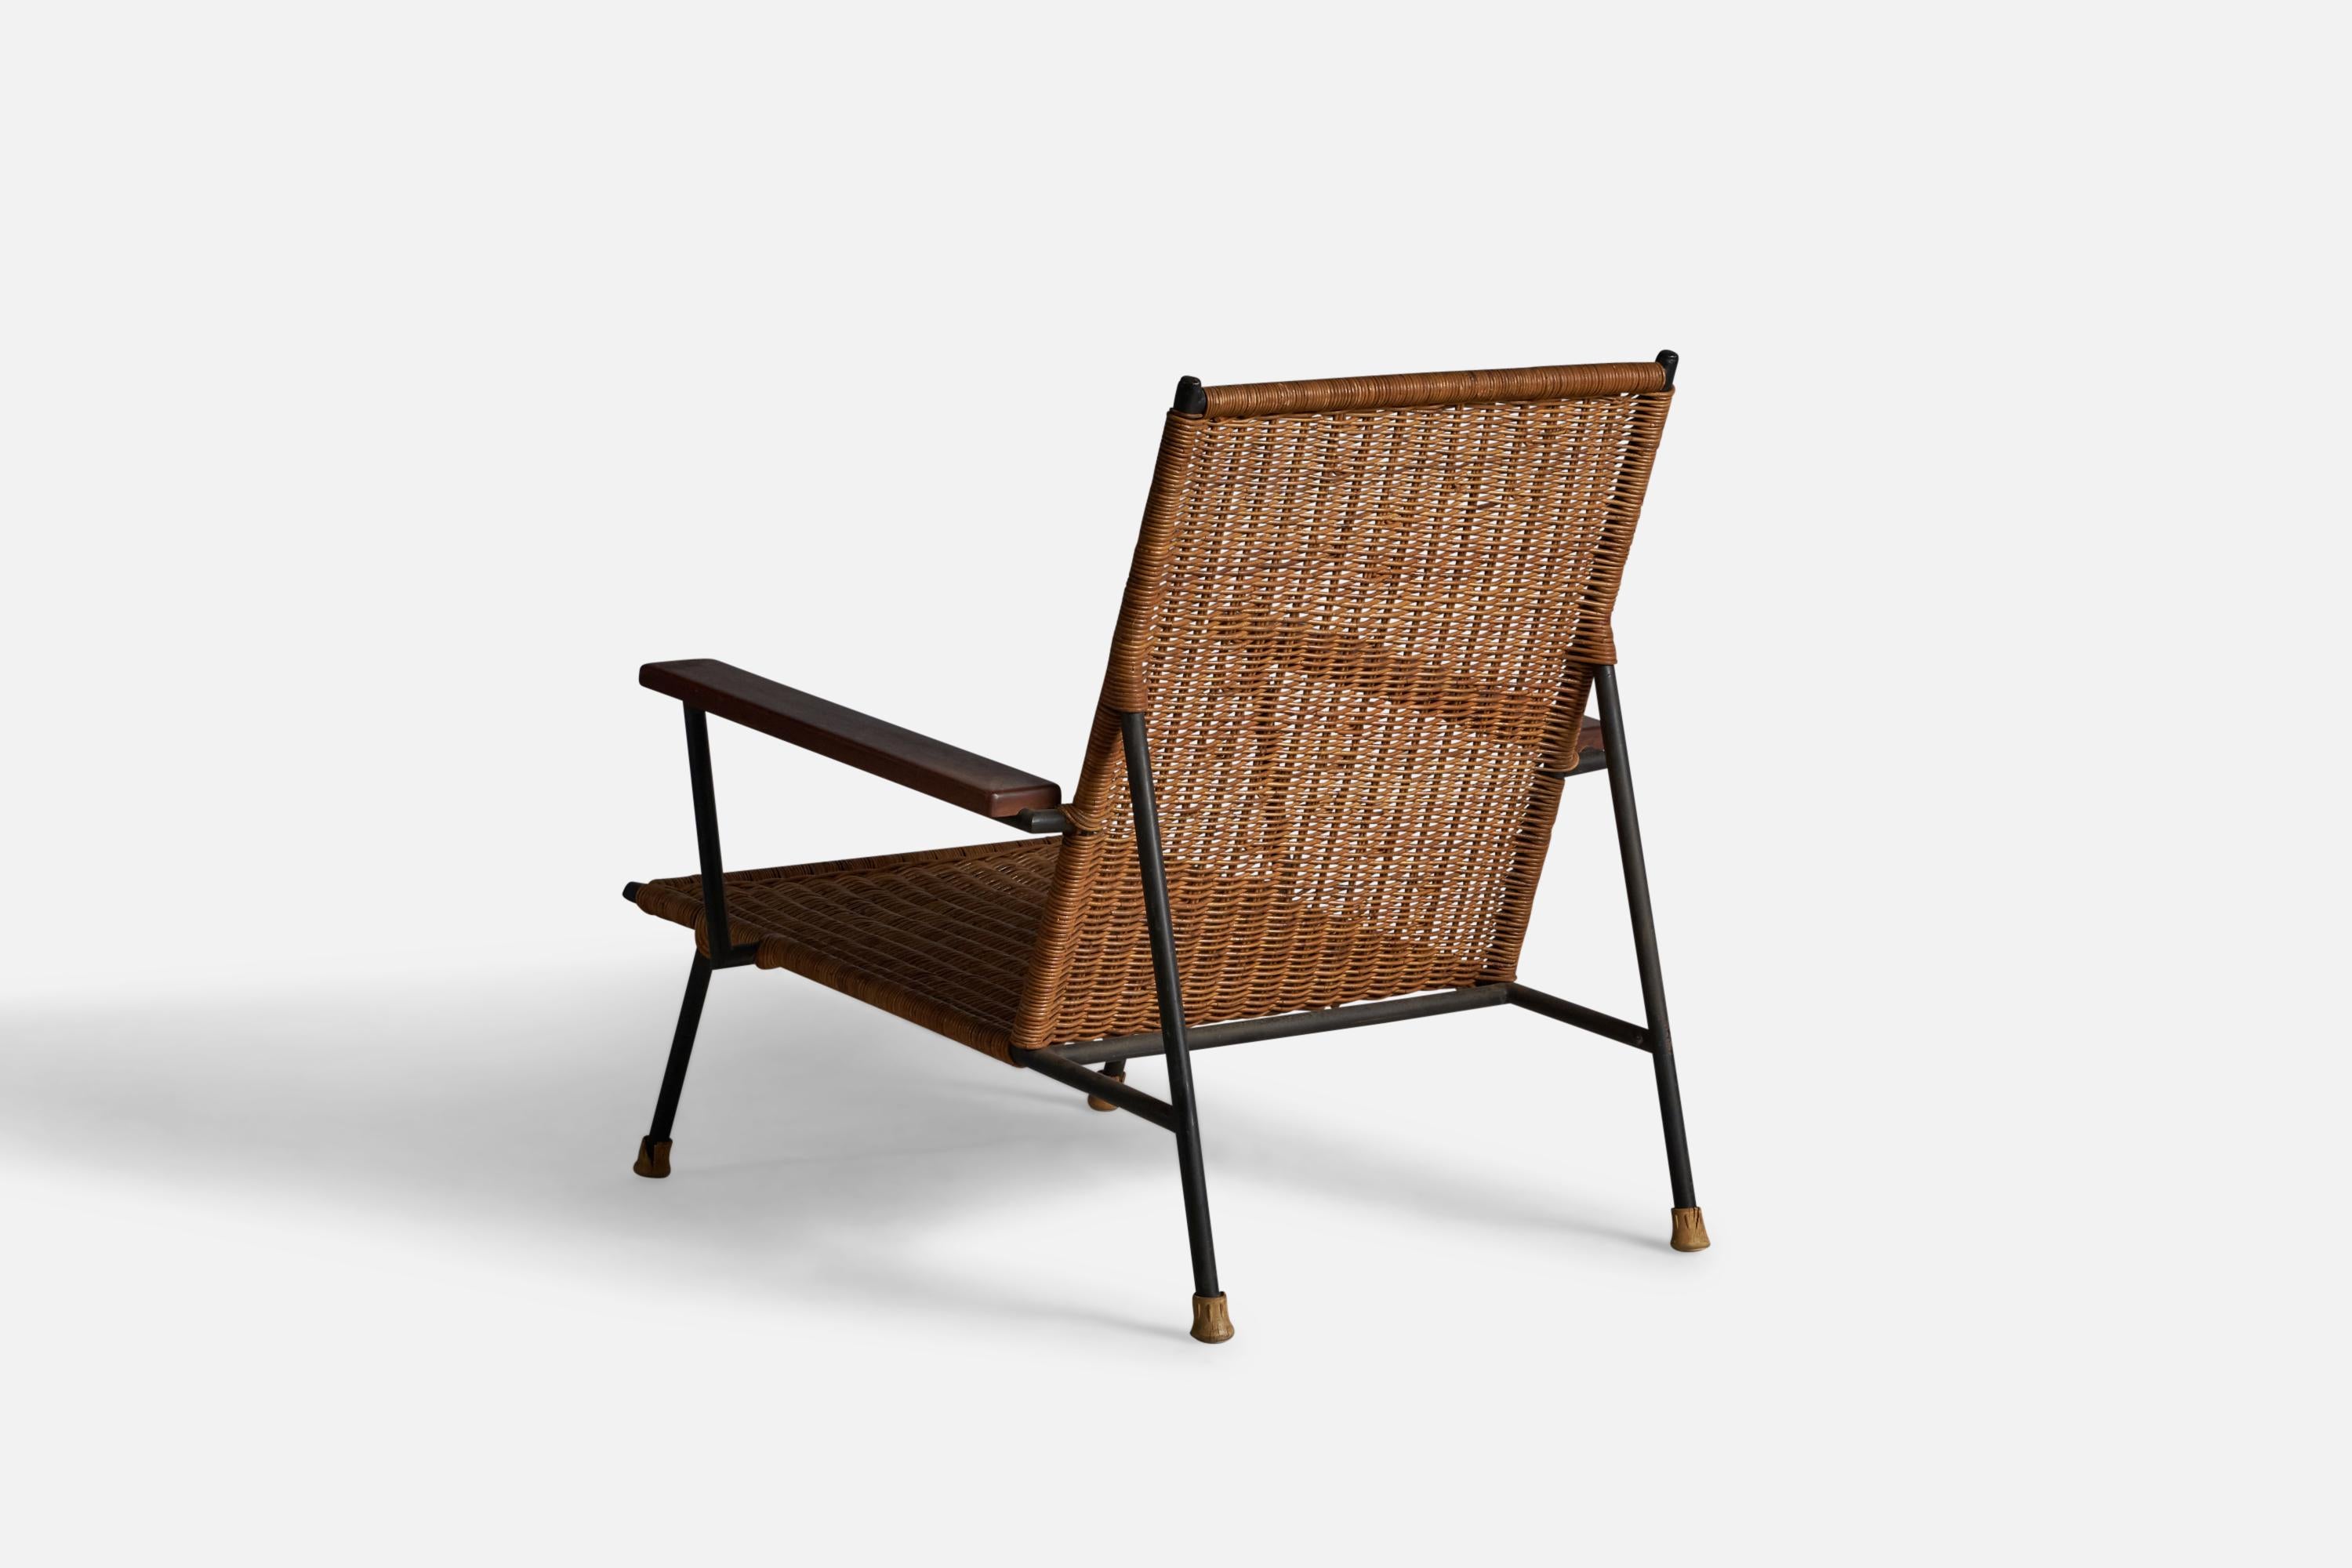 Mid-20th Century American Designer, Lounge Chair, Cane, Wood, Metal, USA, 1950s For Sale